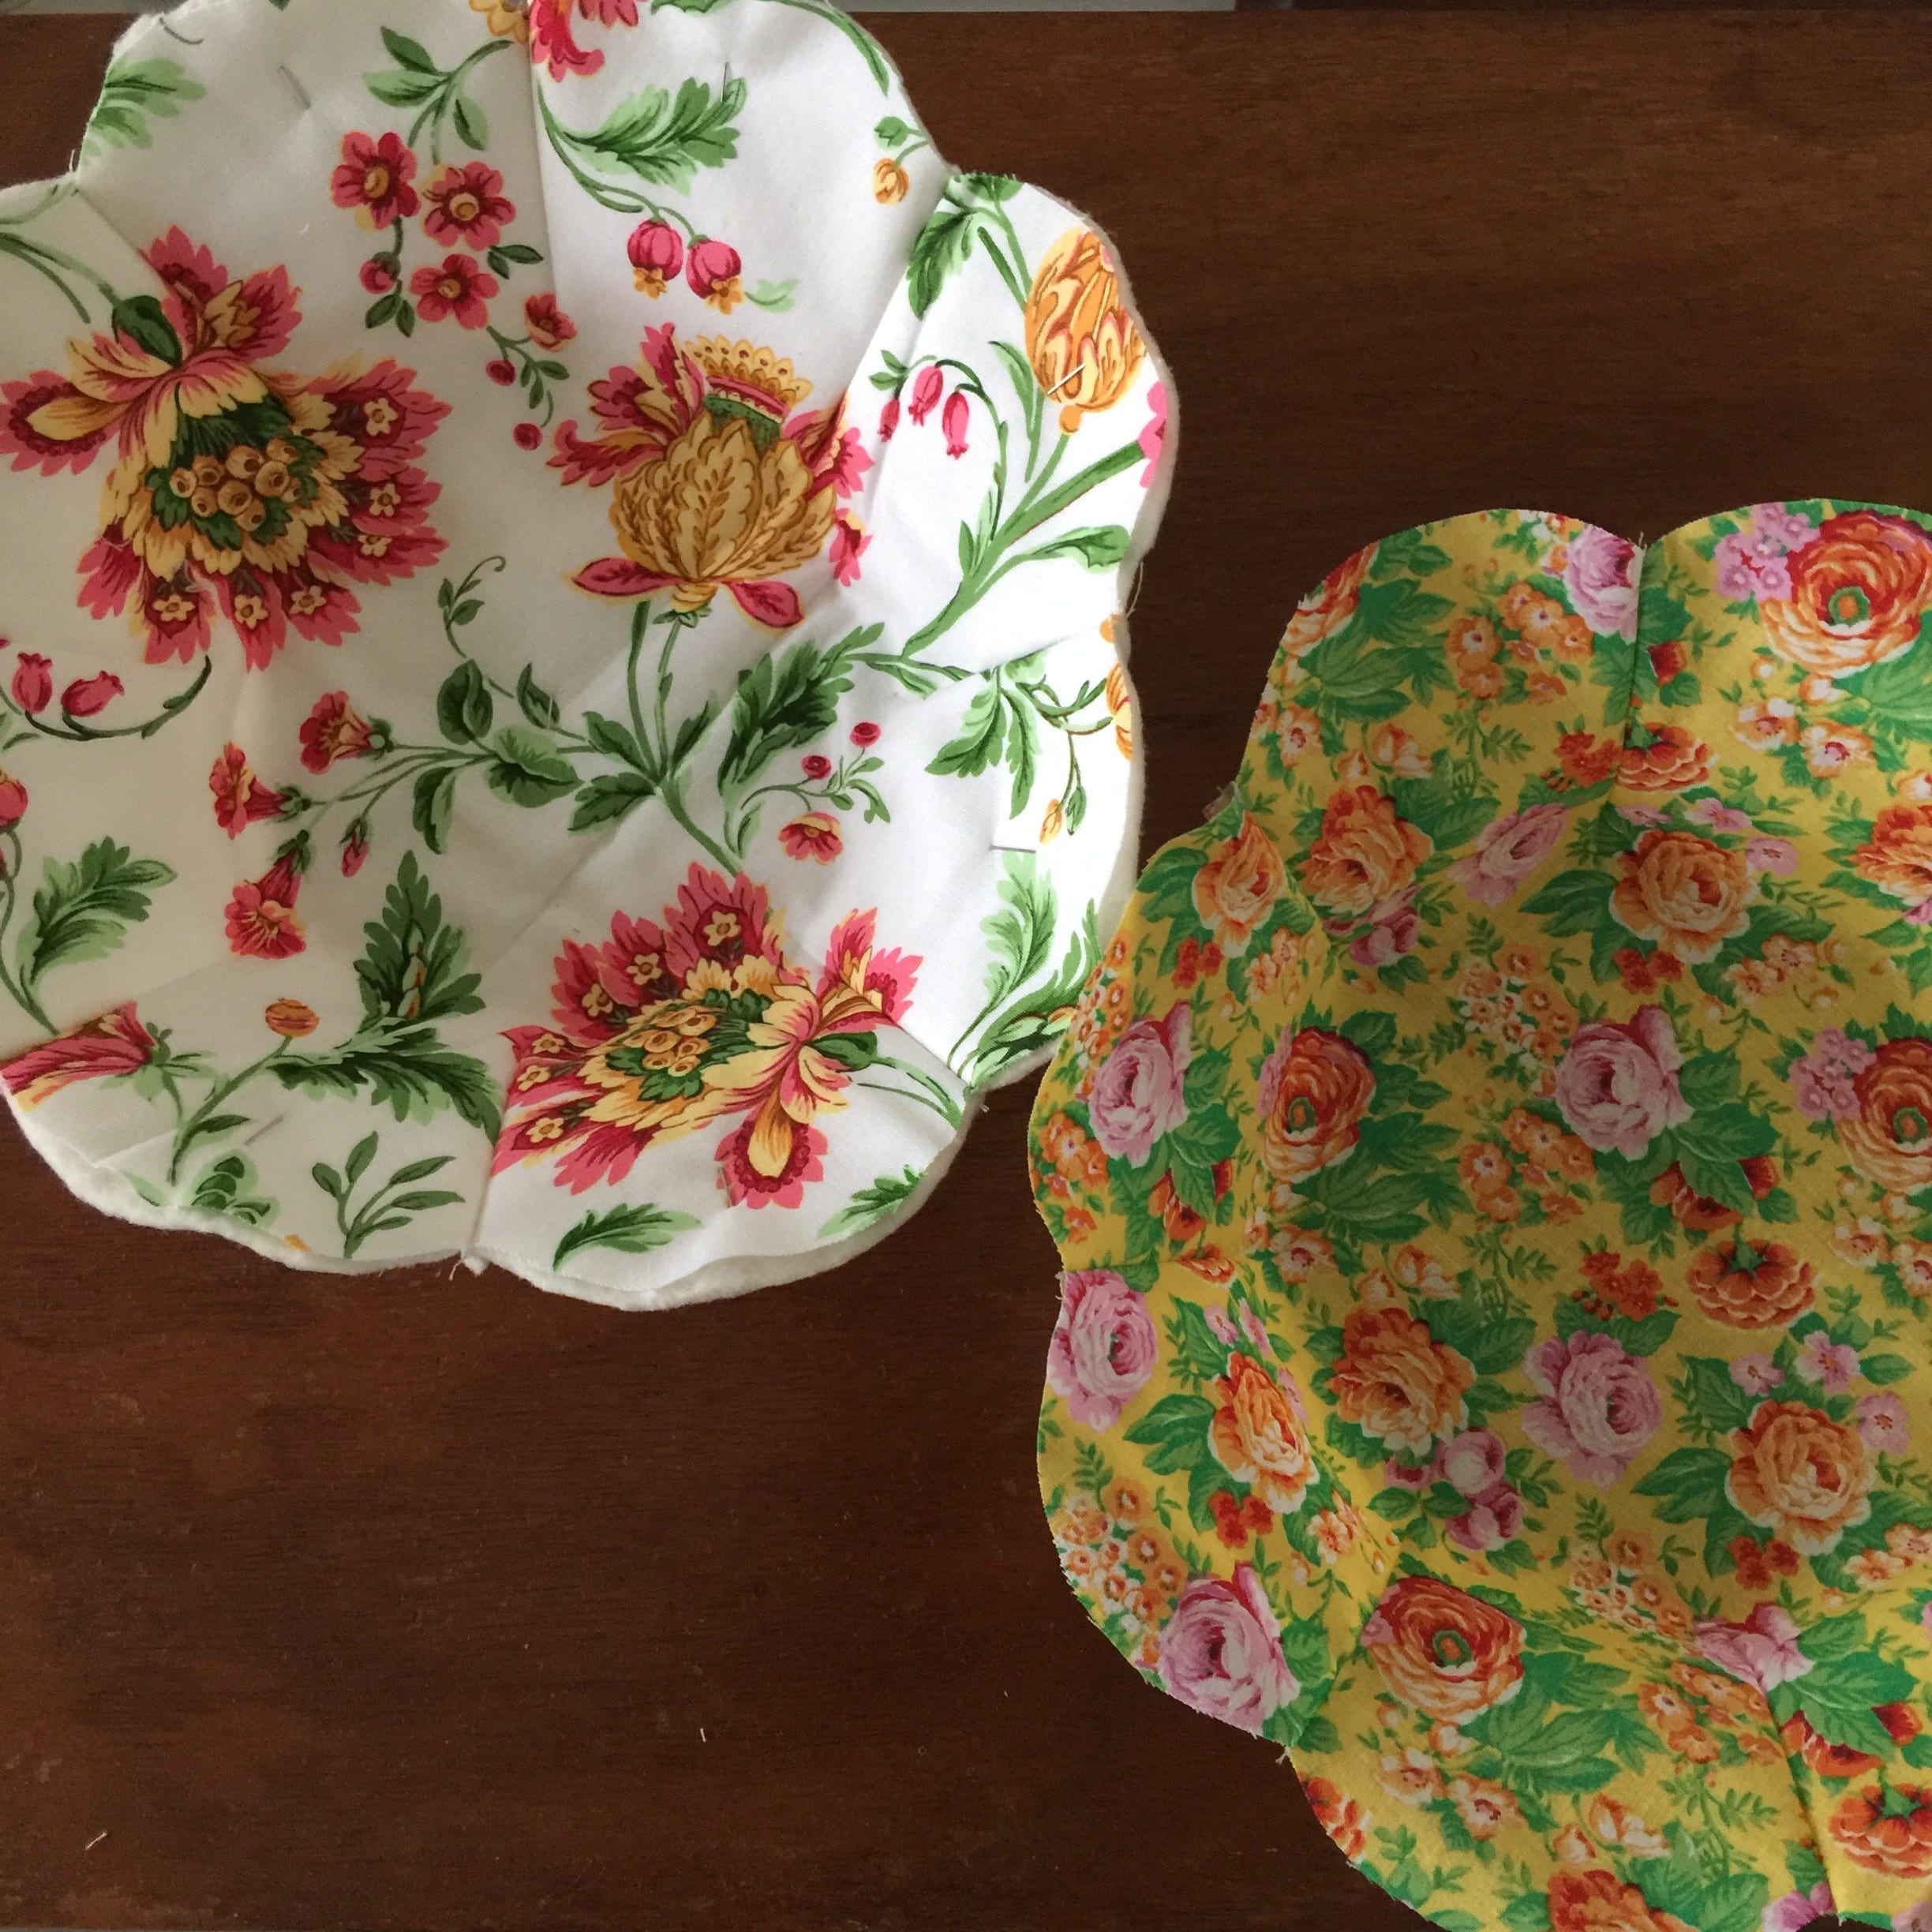 How to make quilted microwave bowl cozy holders - Tulip Square ~ Patterns  for useful quilted goods